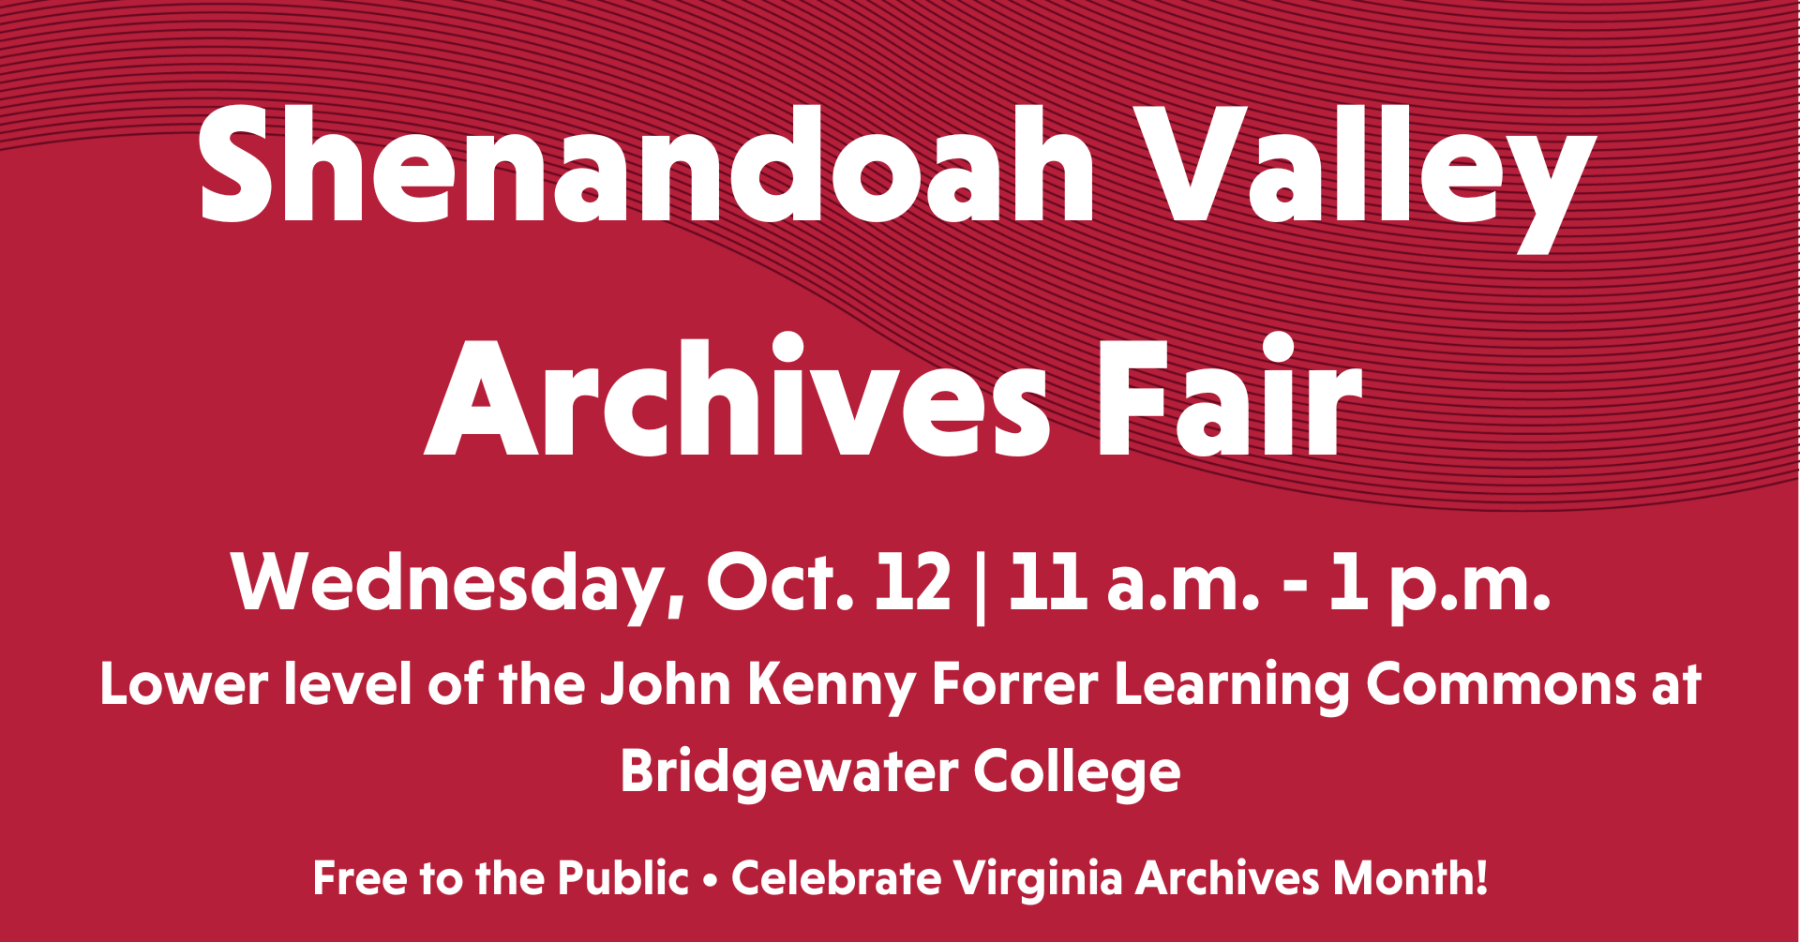 Shenandoah Valley Archives Fair Wednesday October 12 11 am - 1 pm. Lower level of the John Kenney Forrer Learning Commons at Bridgewater College. Free to the public. Celebrate Virginia Archives Month!